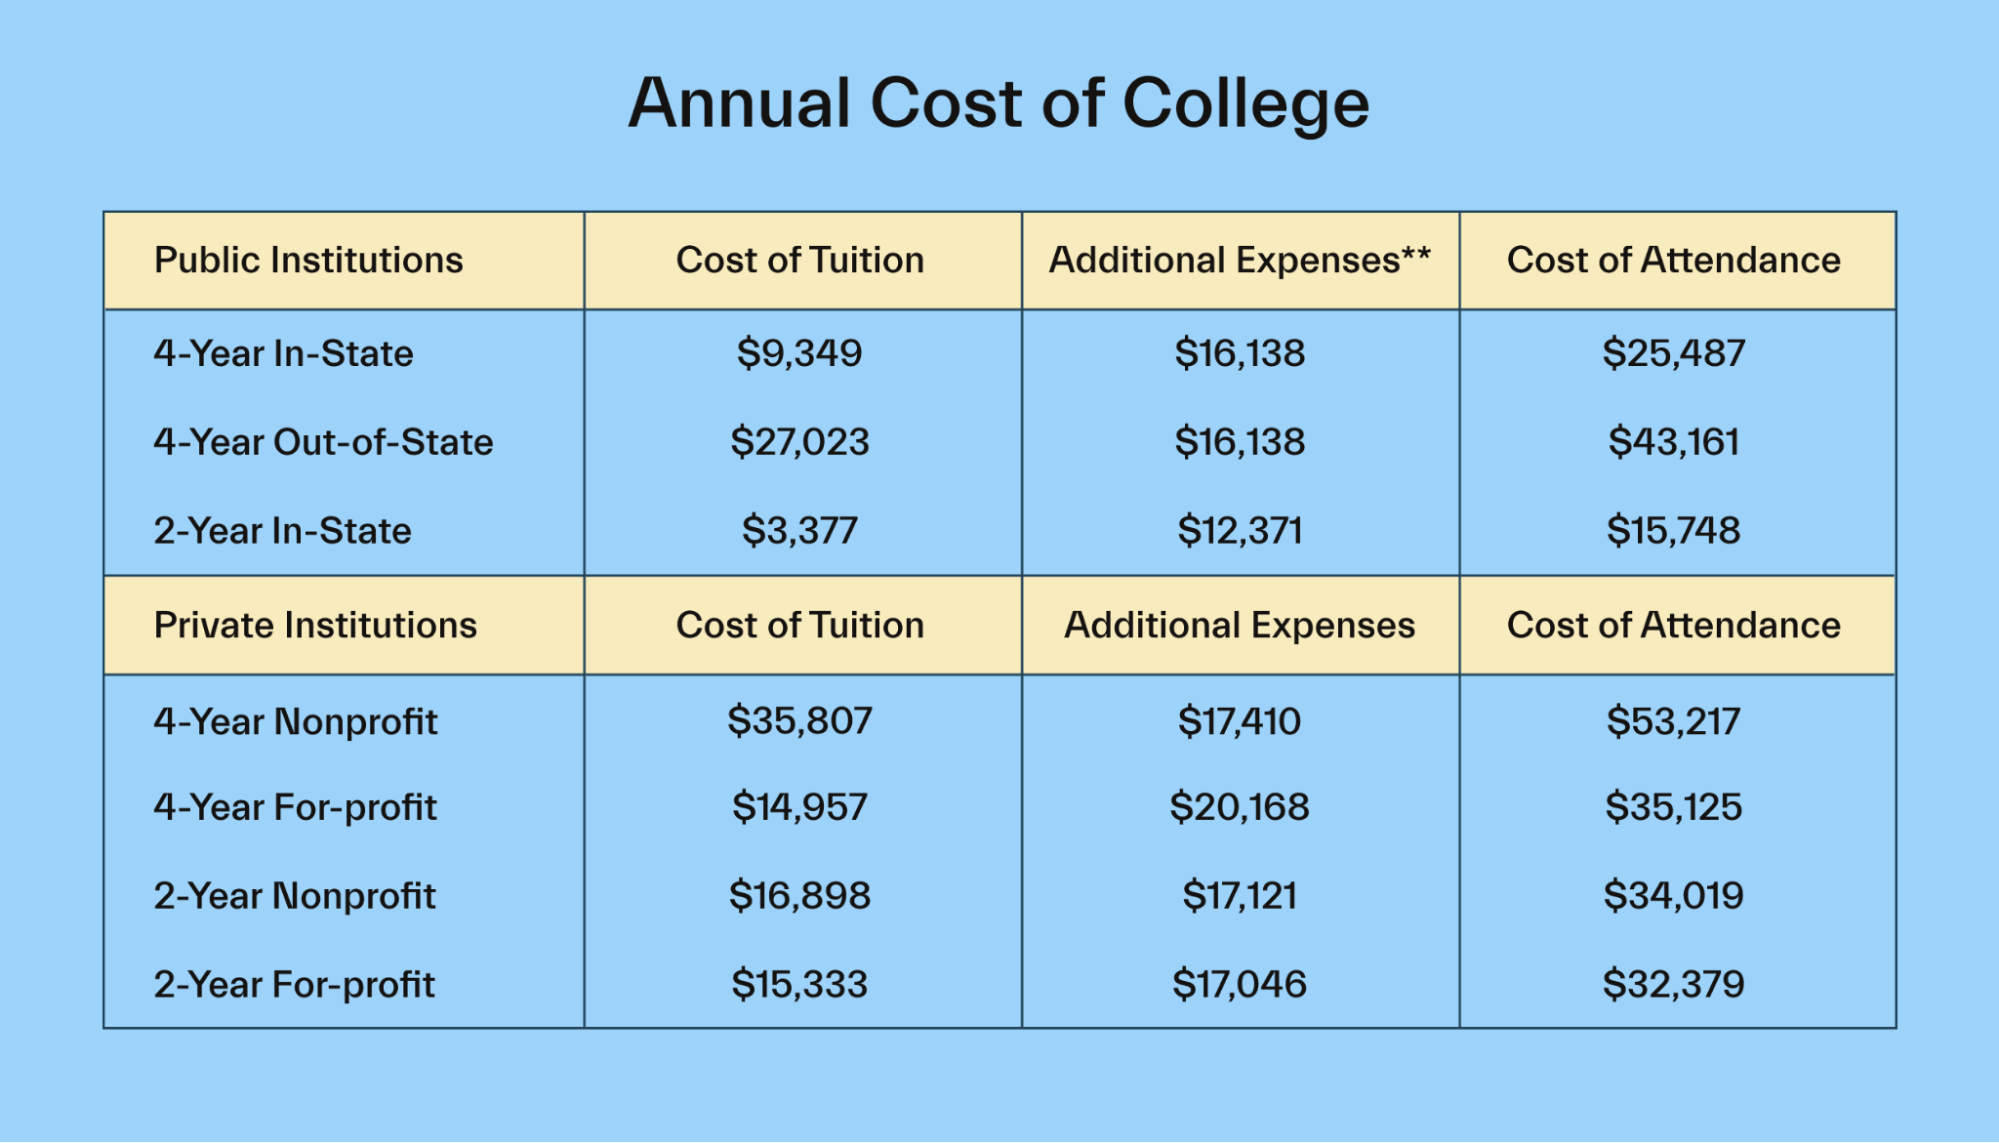 Annual Cost of College